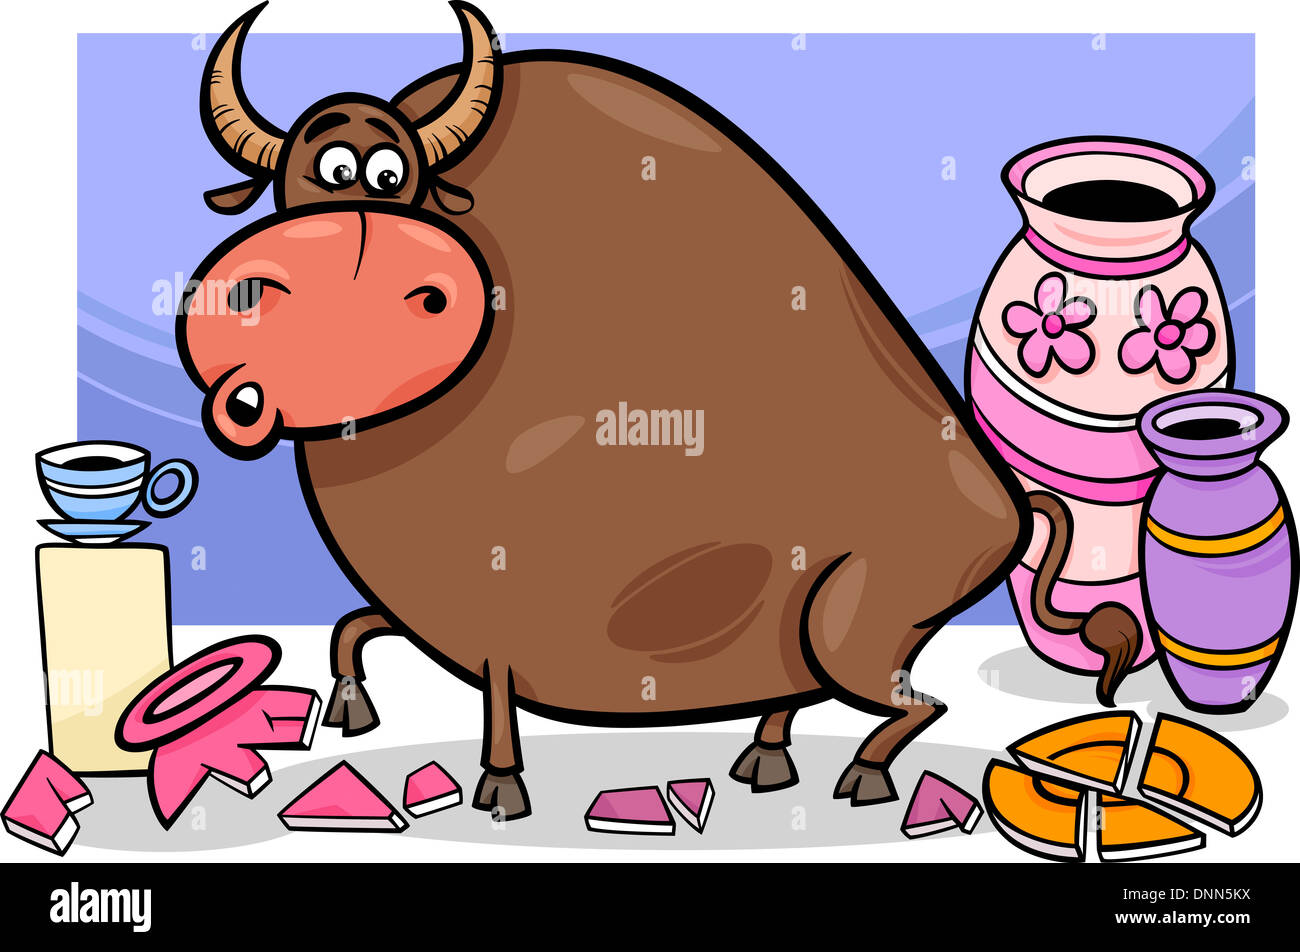 Cartoon Humor Concept Illustration of Bull in a China Shop Saying Stock Photo